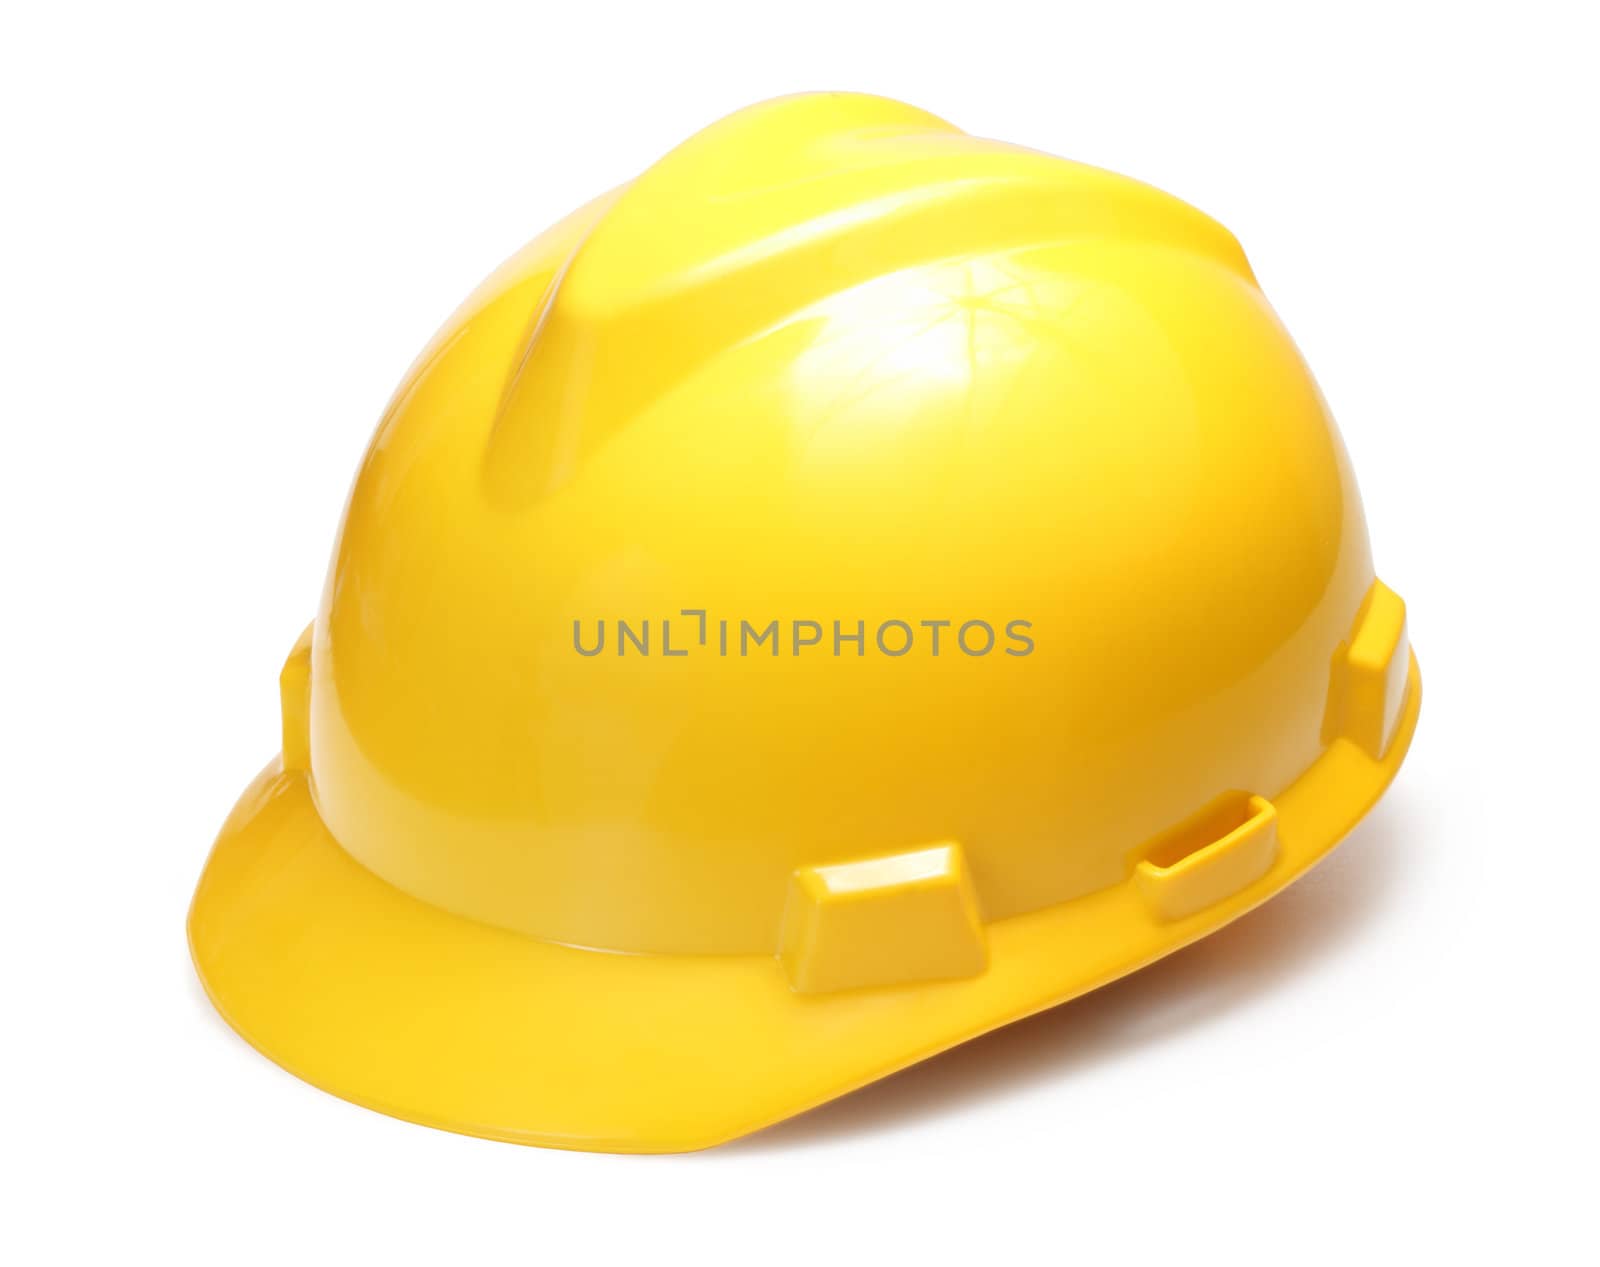 Hard hat by photosoup